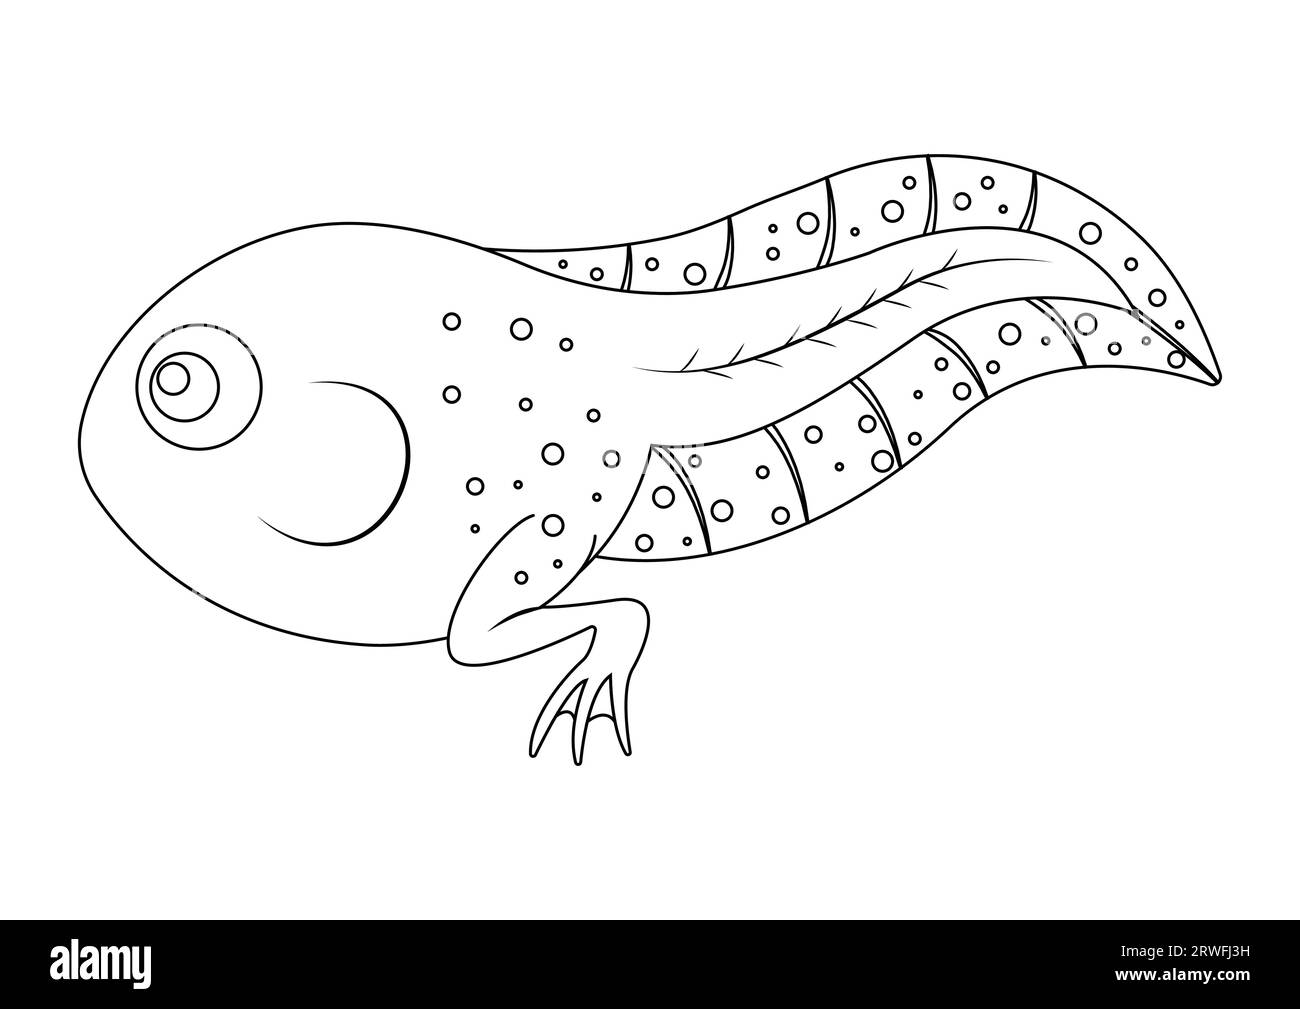 Coloring Page of Tadpole Cartoon Character Vector Illustration Isolated on White Background Stock Vector